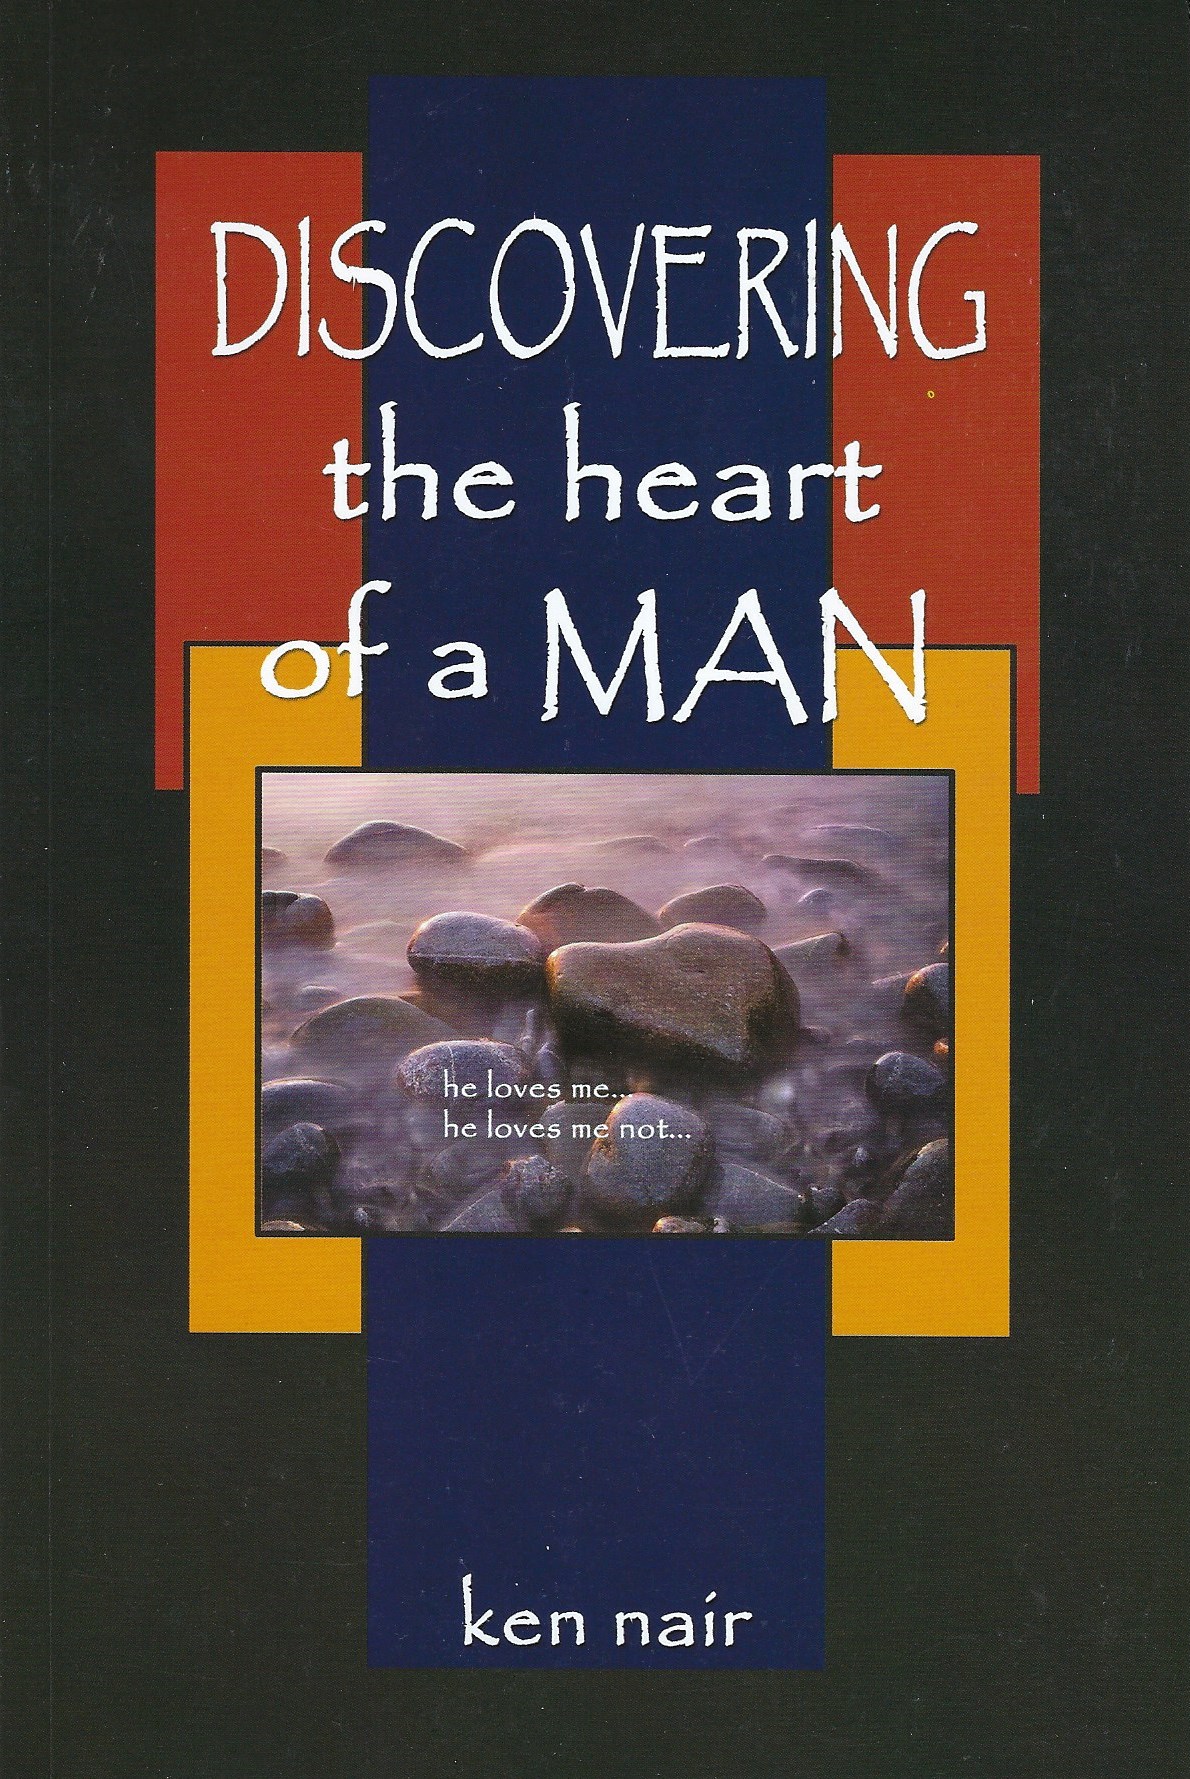 DISCOVERING THE HEART OF A MAN Ken Nair